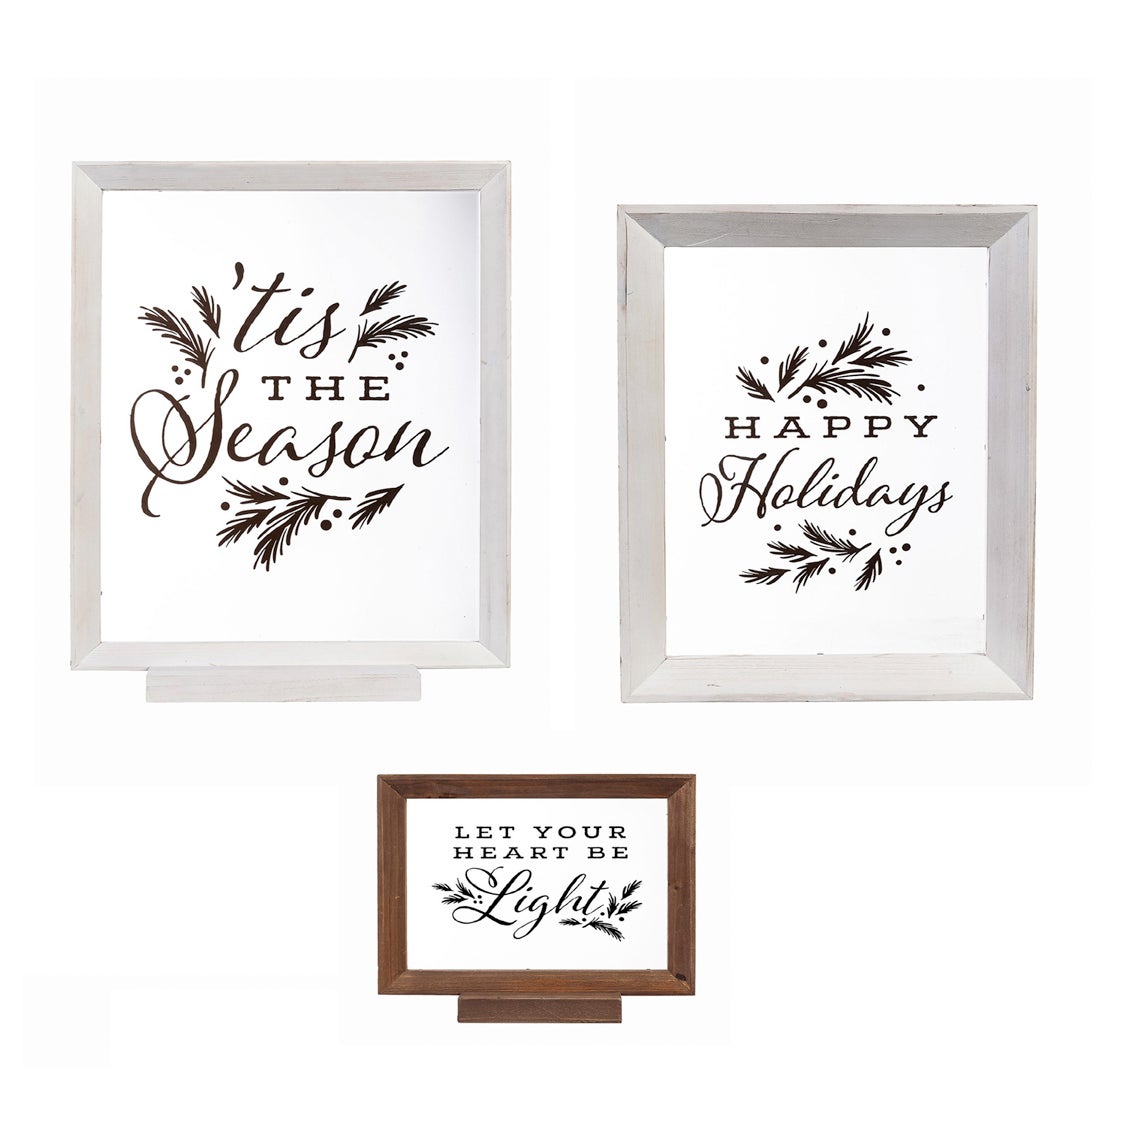 Wood Framed Decor, Set of 3"Happy Holidays""Let Your Heart Be Light""Tis the Season"